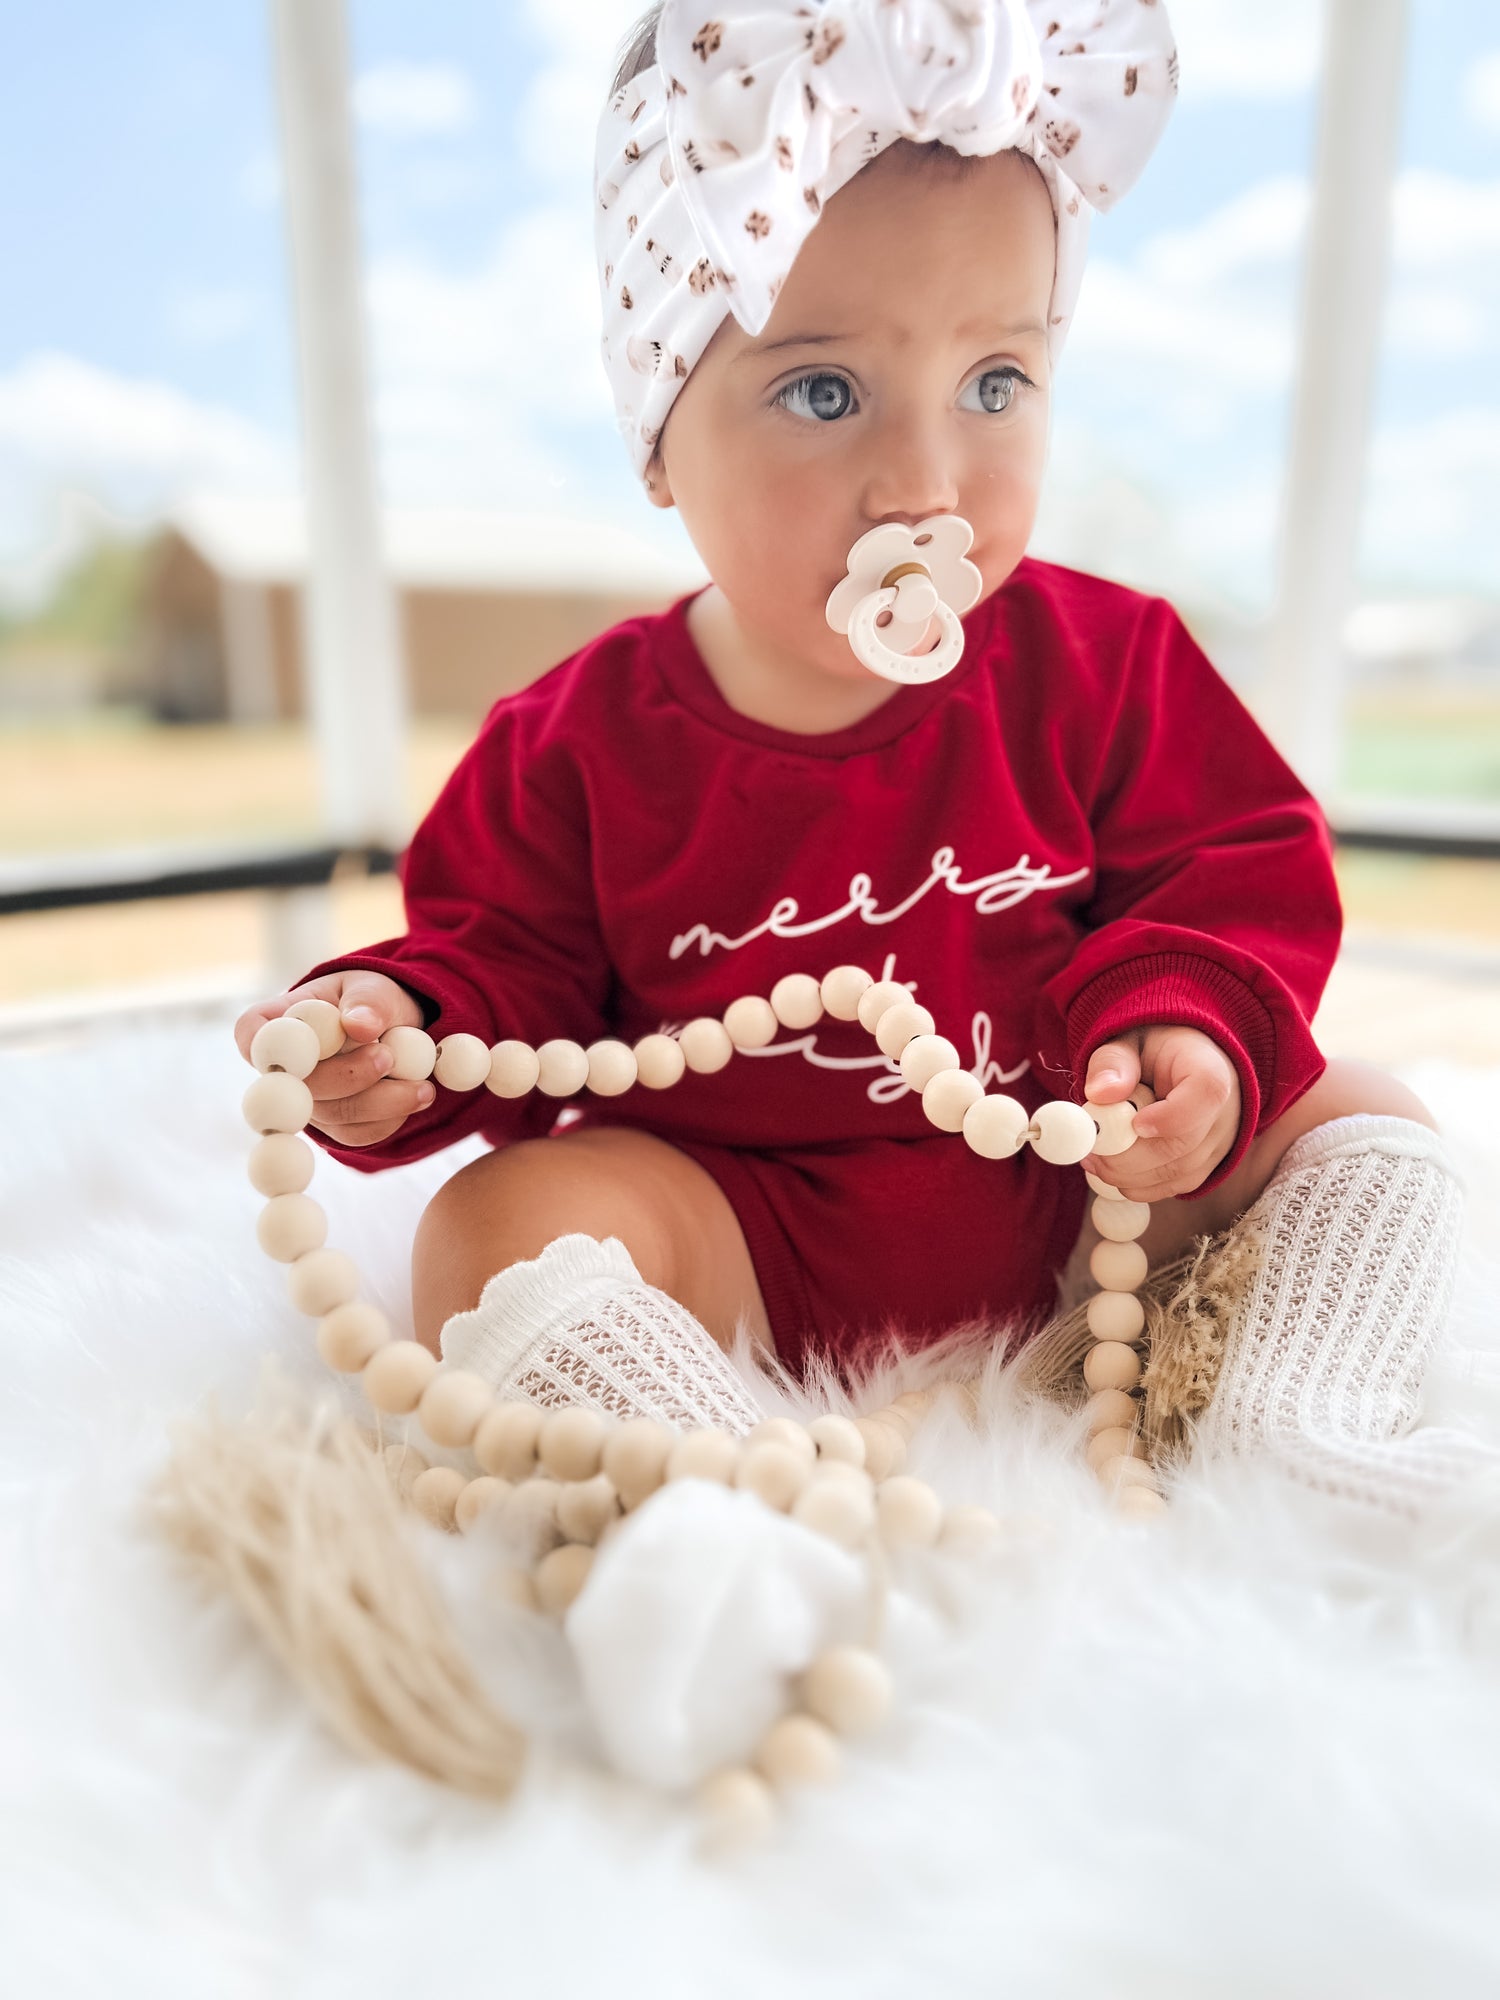 Christmas Romper Unisex Baby | Toddler Bodysuit | Red Winter Outfit - EllaLaine